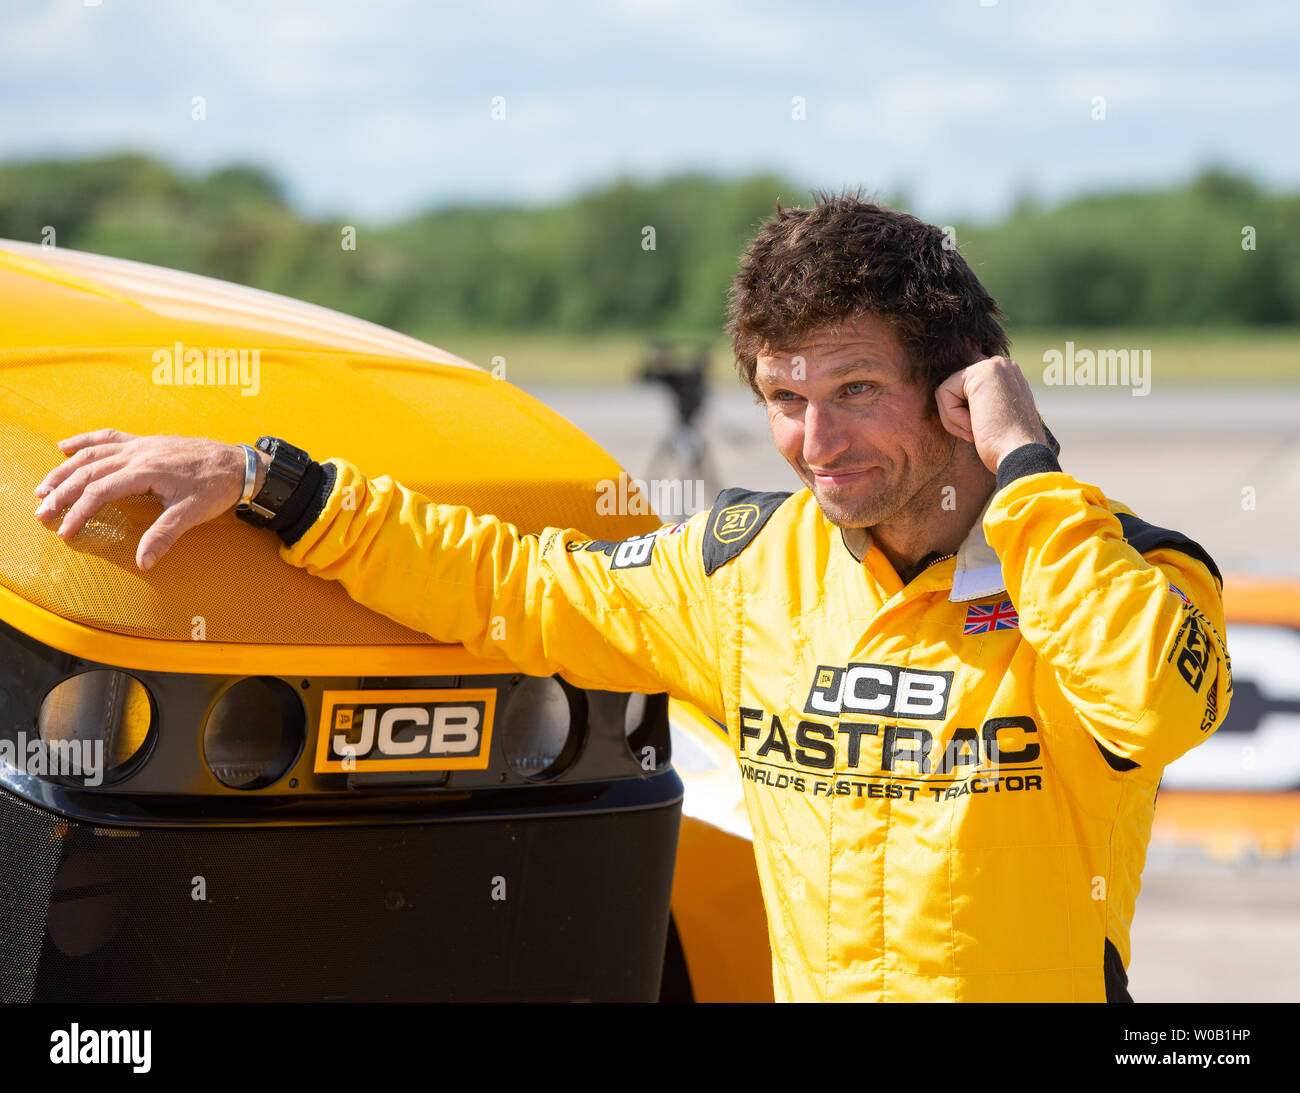 Guy Martin. JCB Agri-machinery manufactures making a new British speed record for a tractor of 103.6 mph, beating the previous 87.27 mph record set in Stock Photo